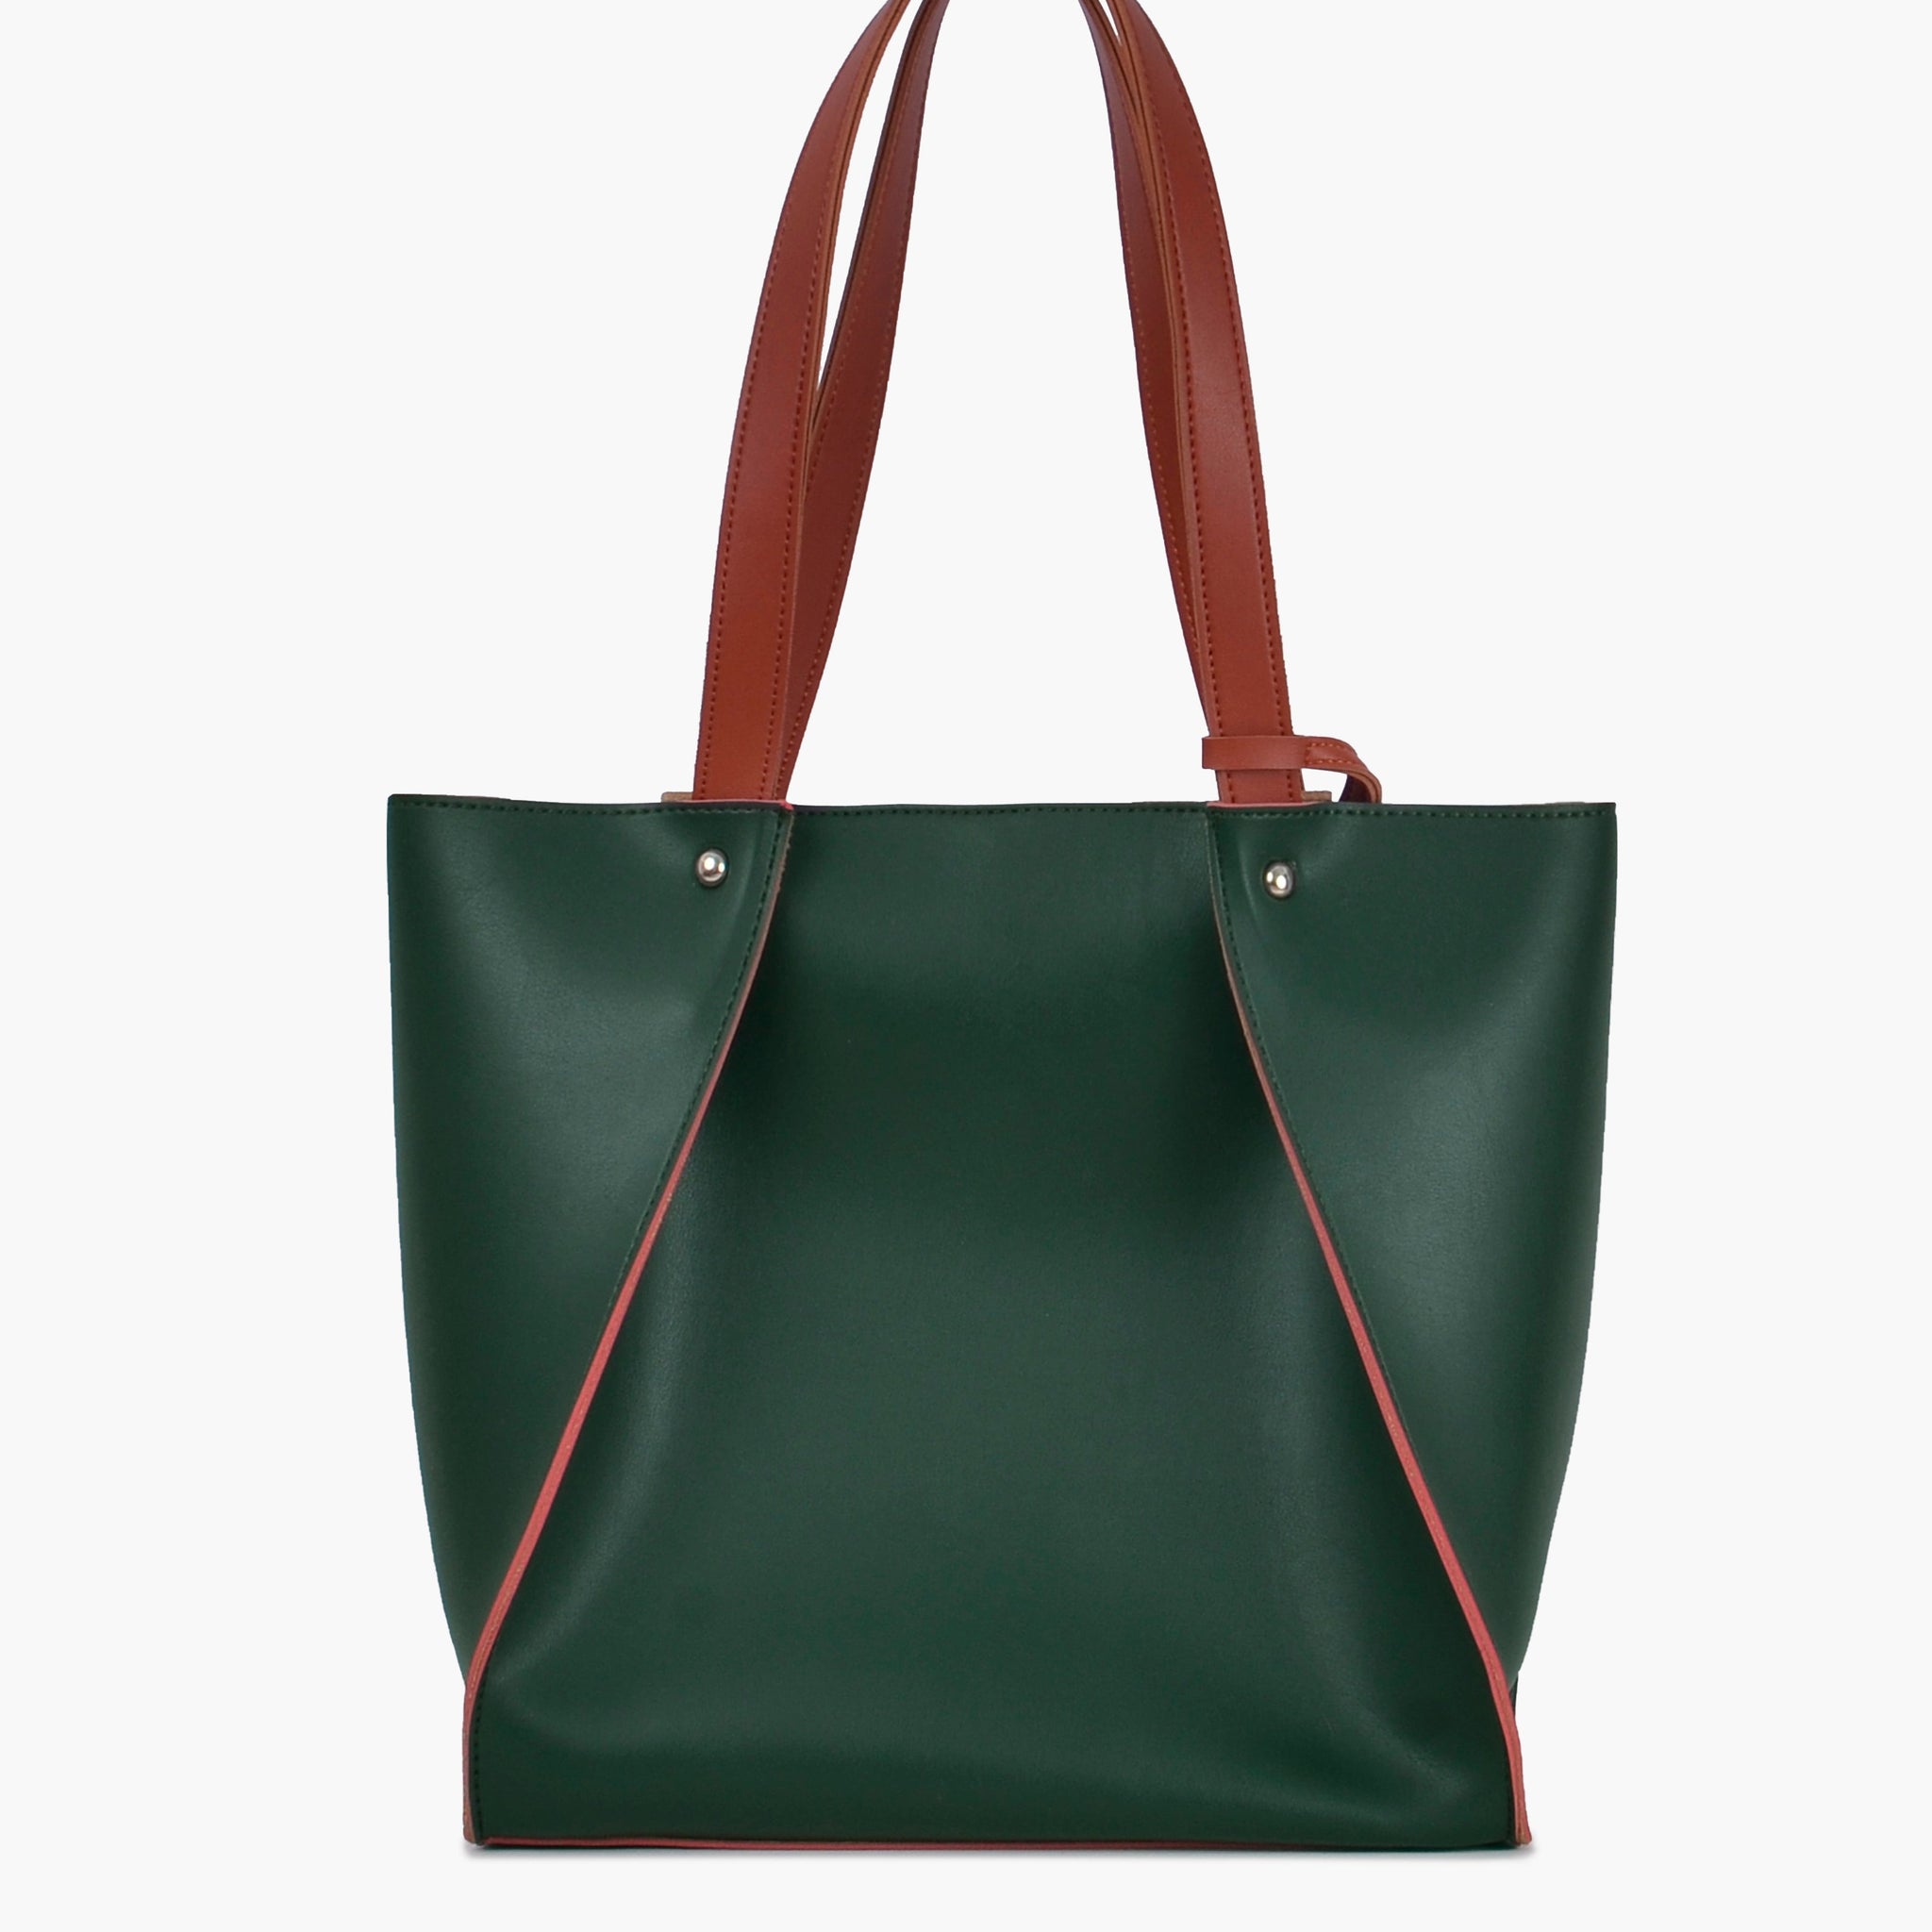 Buy Shopping Tote Bag - Army Green in Pakistan